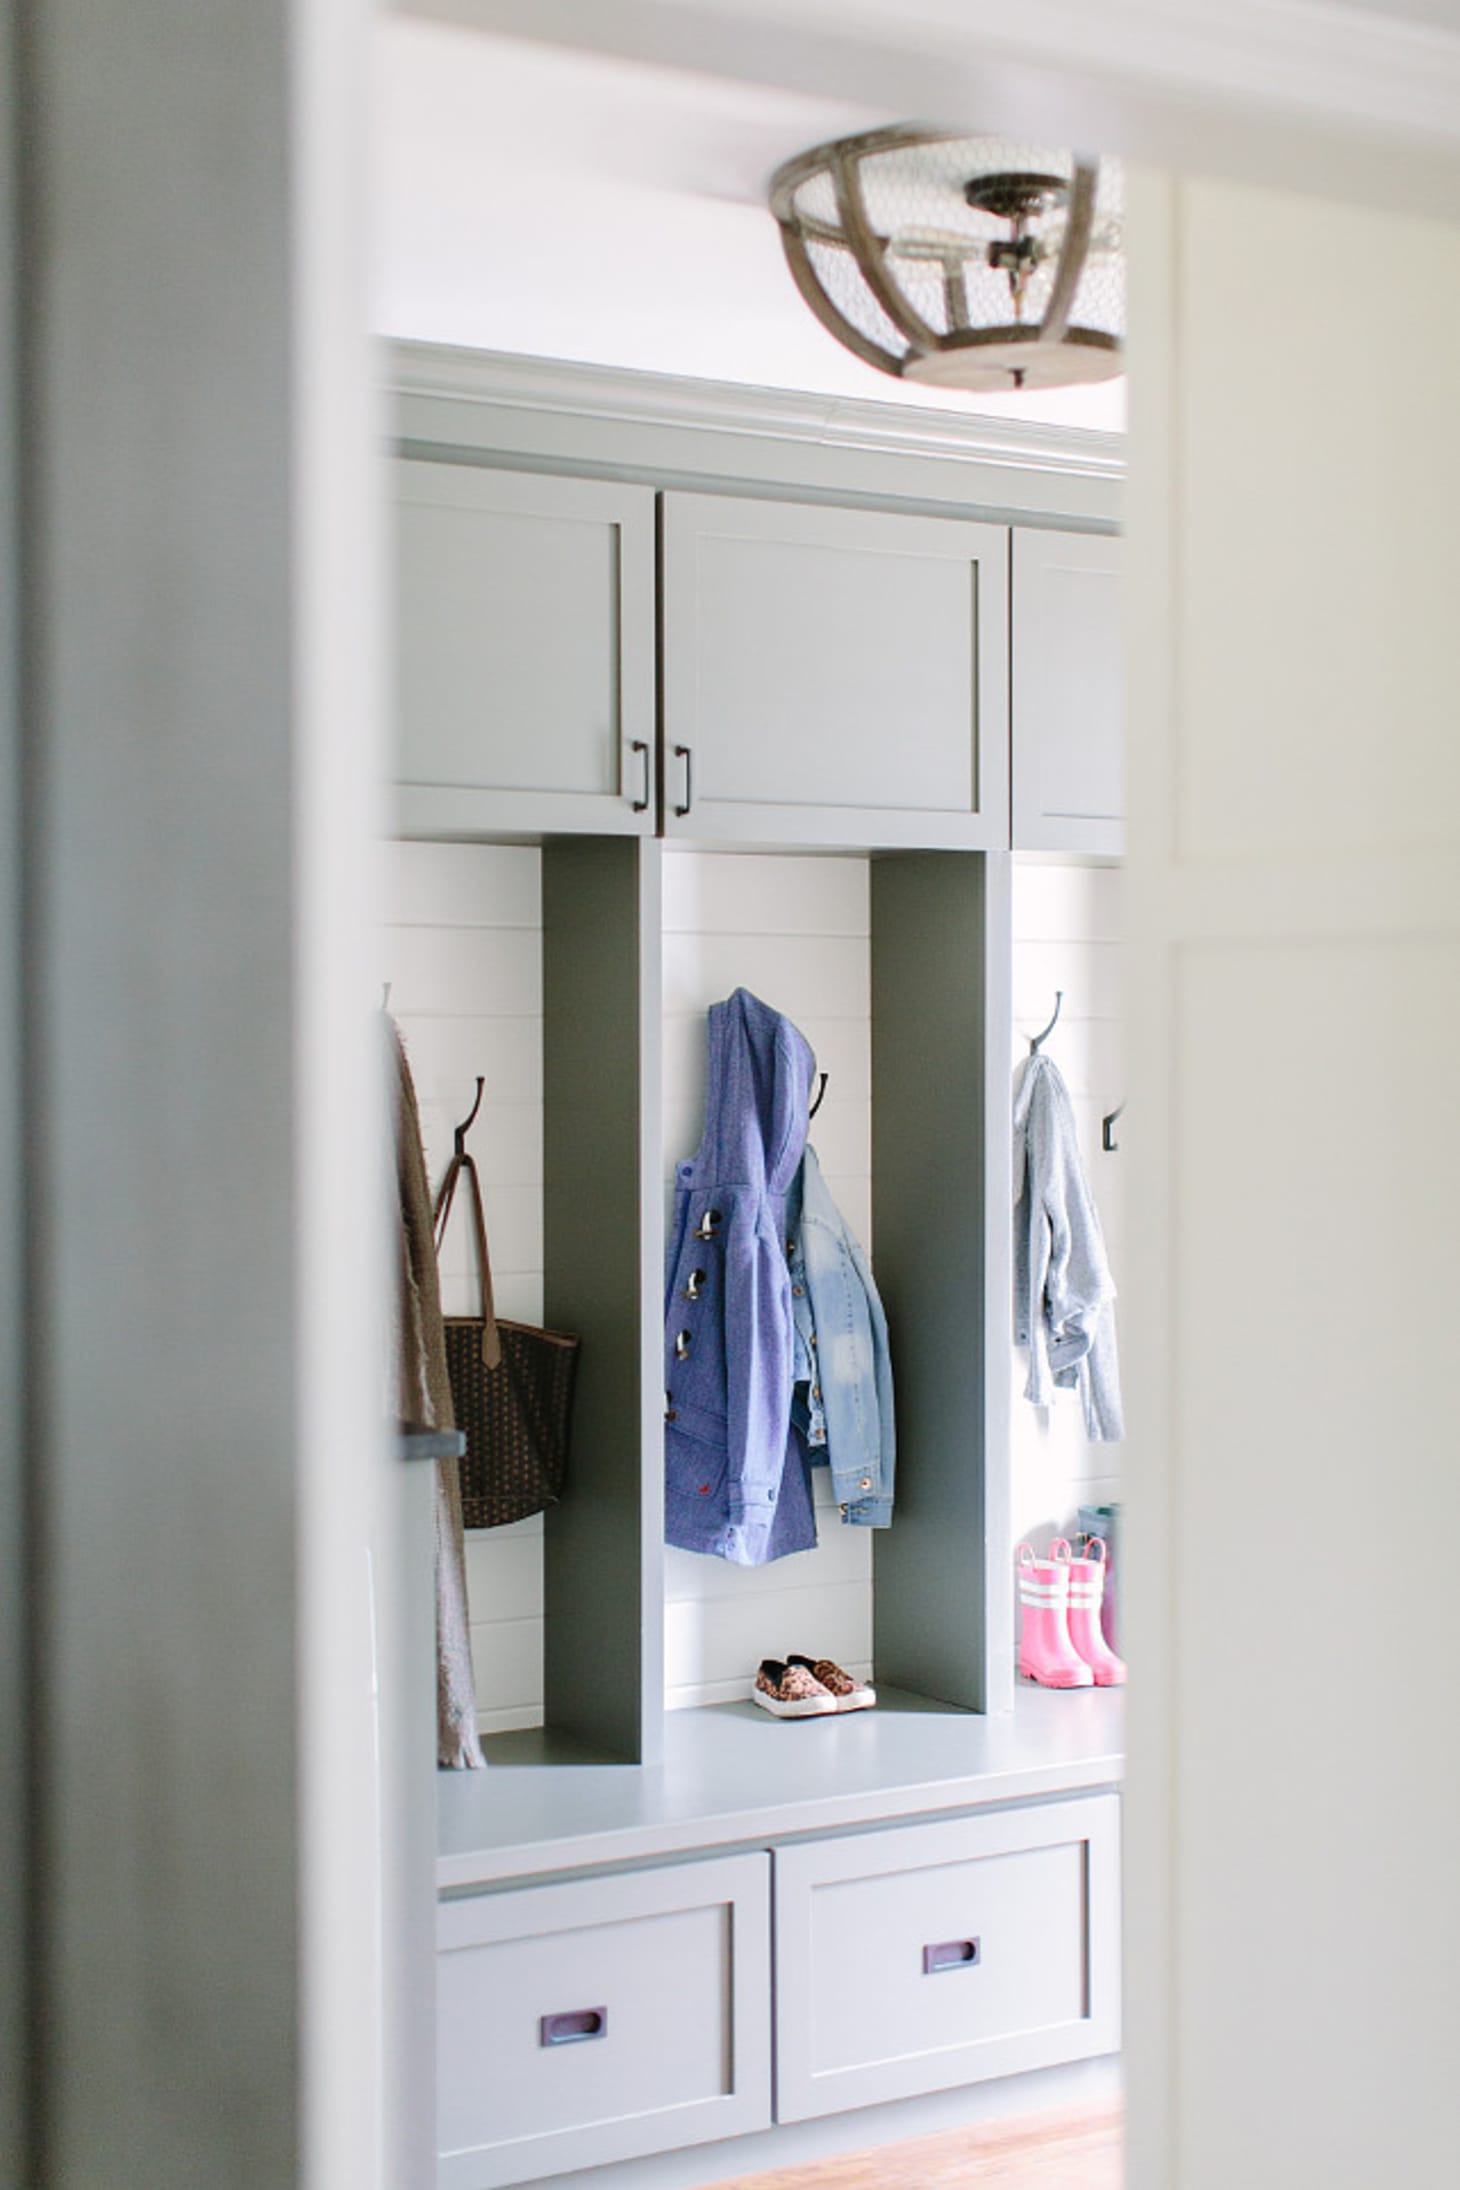 11 Backpack Storage Ideas When You Don't Have A Mudroom